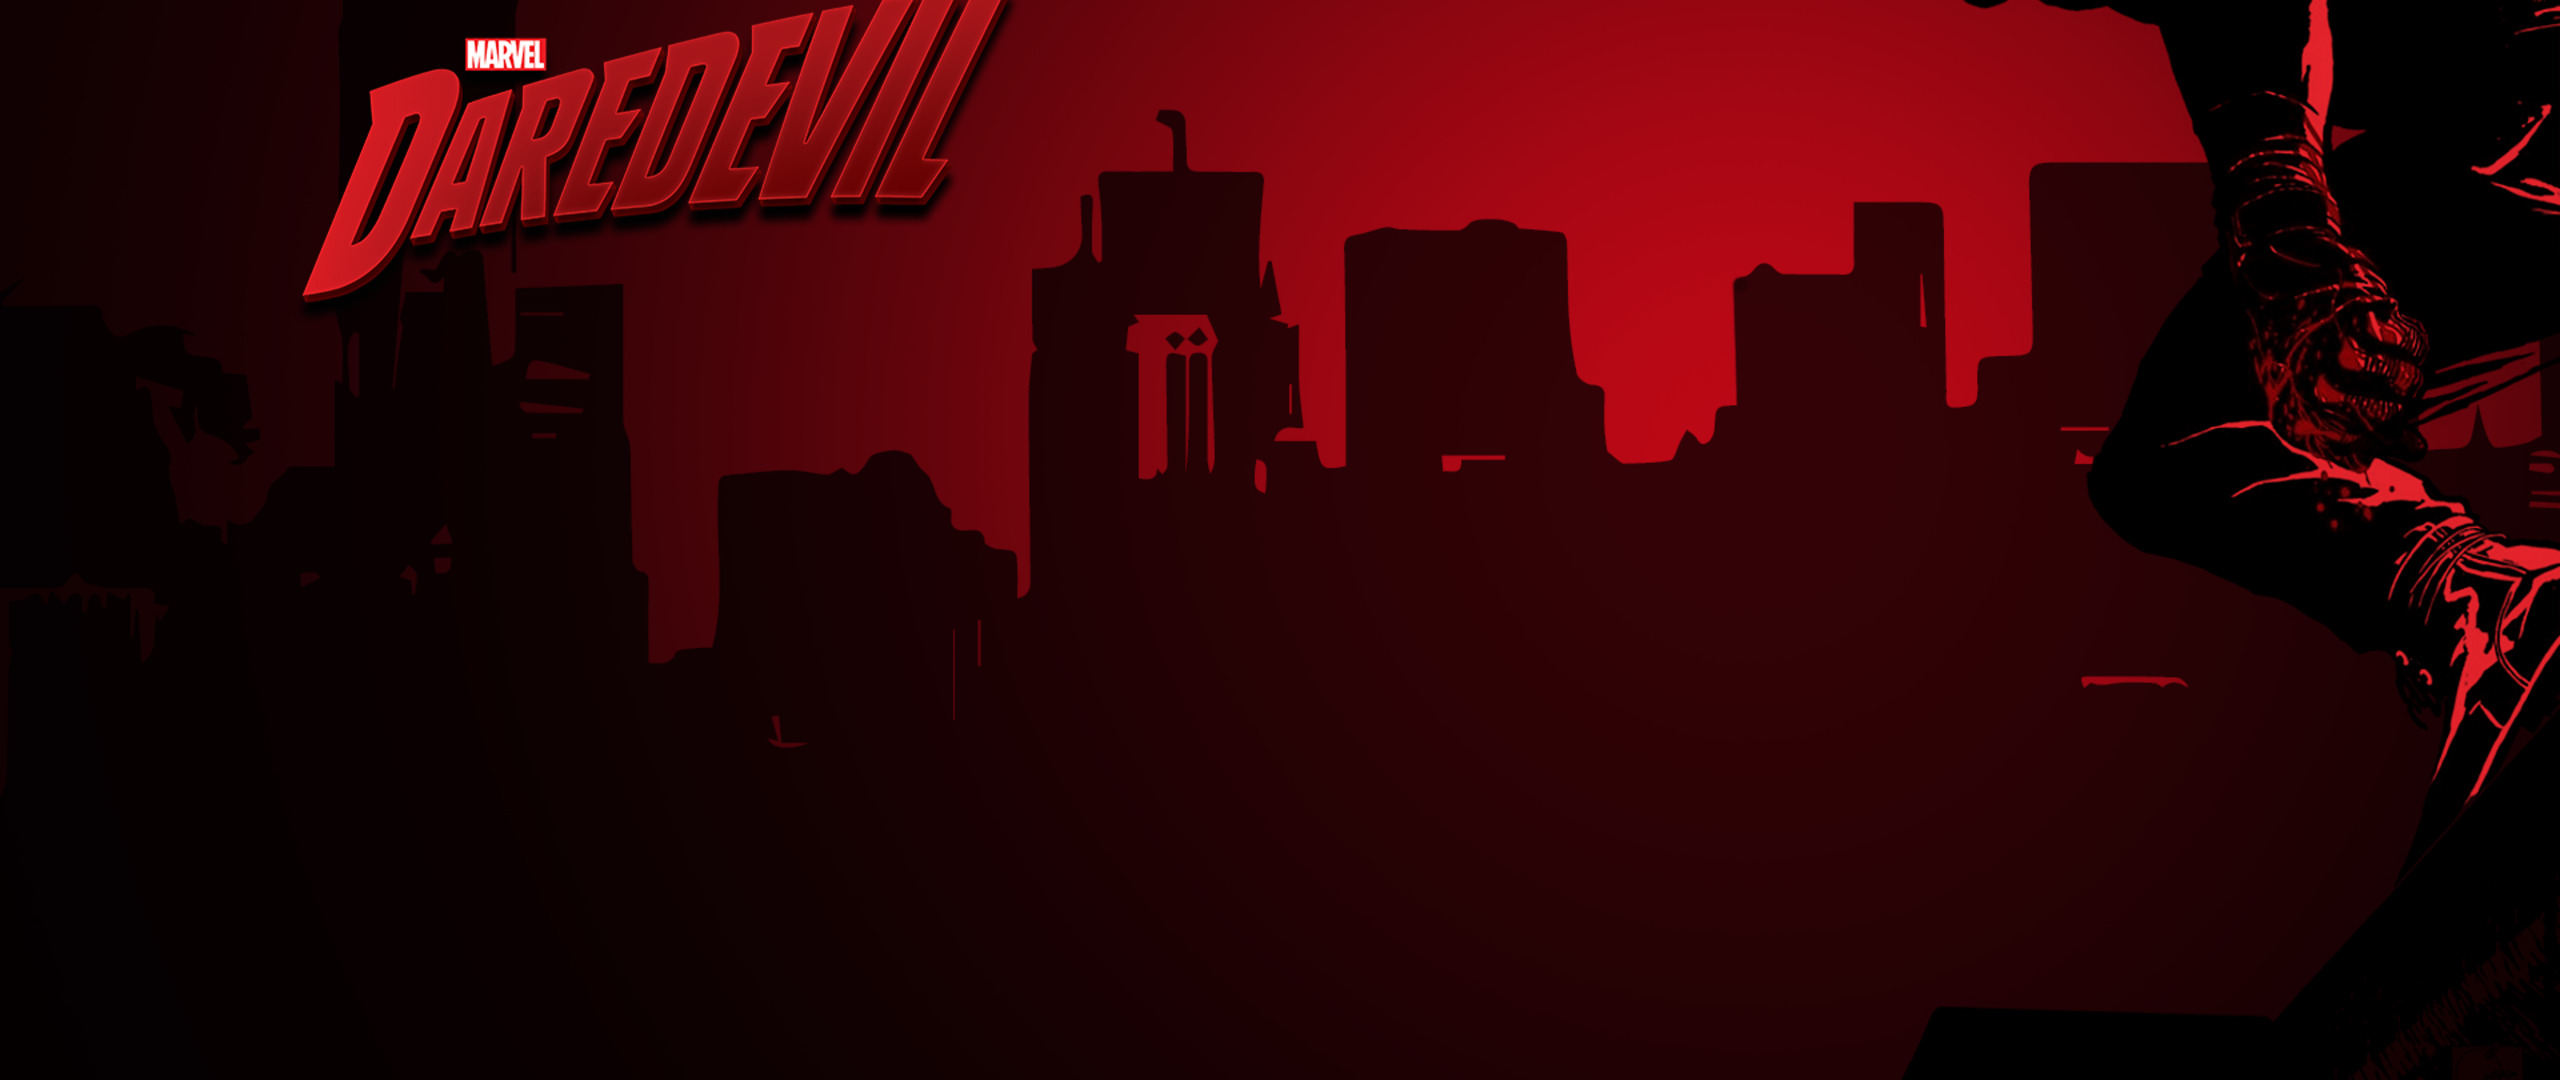 Marvel Daredevil Tv Show 2560x1080 Resolution HD 4k Wallpaper, Image, Background, Photo and Picture